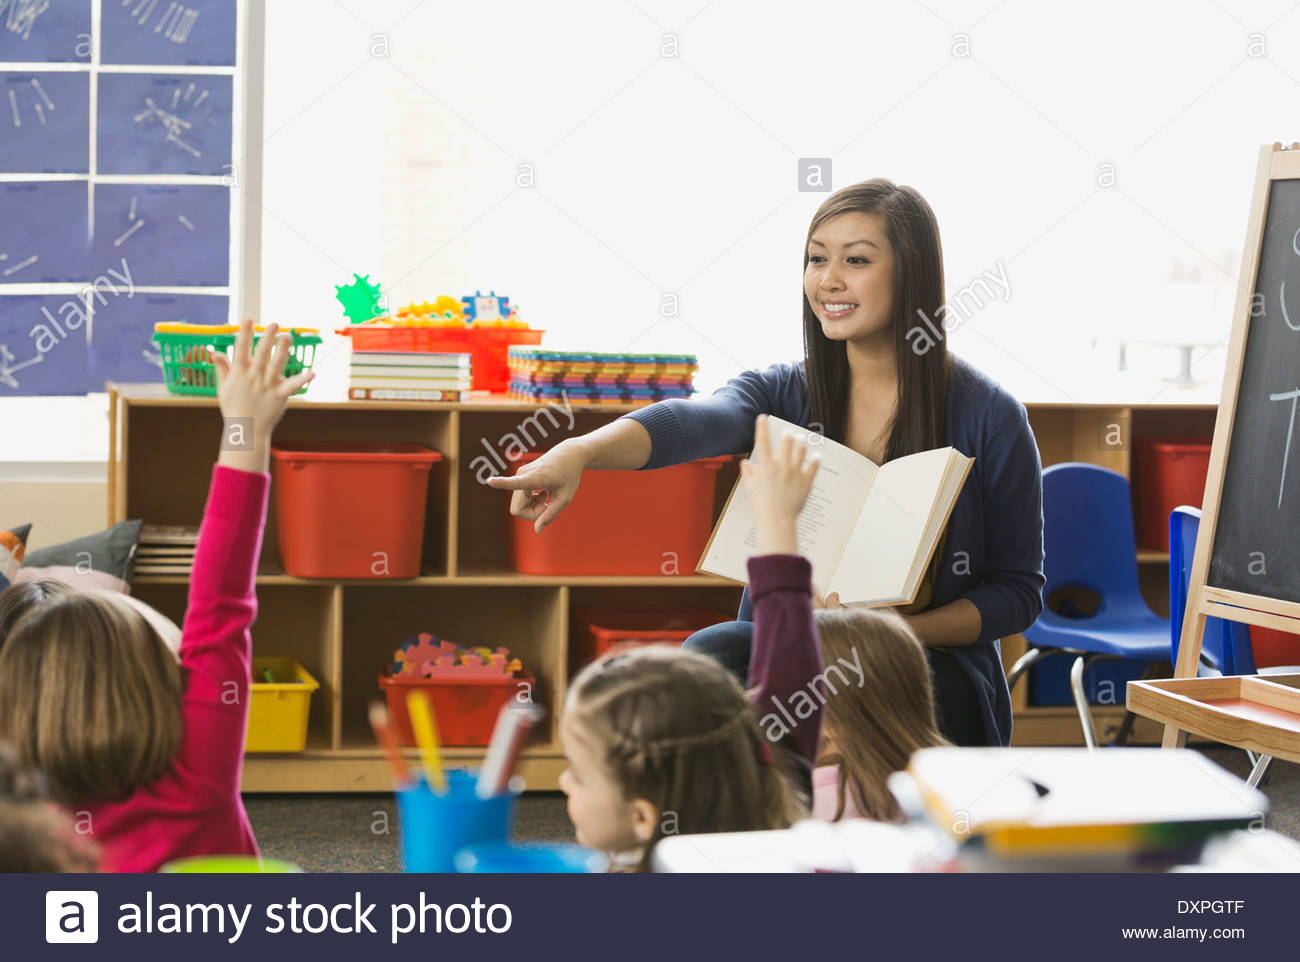 Teacher pointing at student with hands raised in class Stock Photo